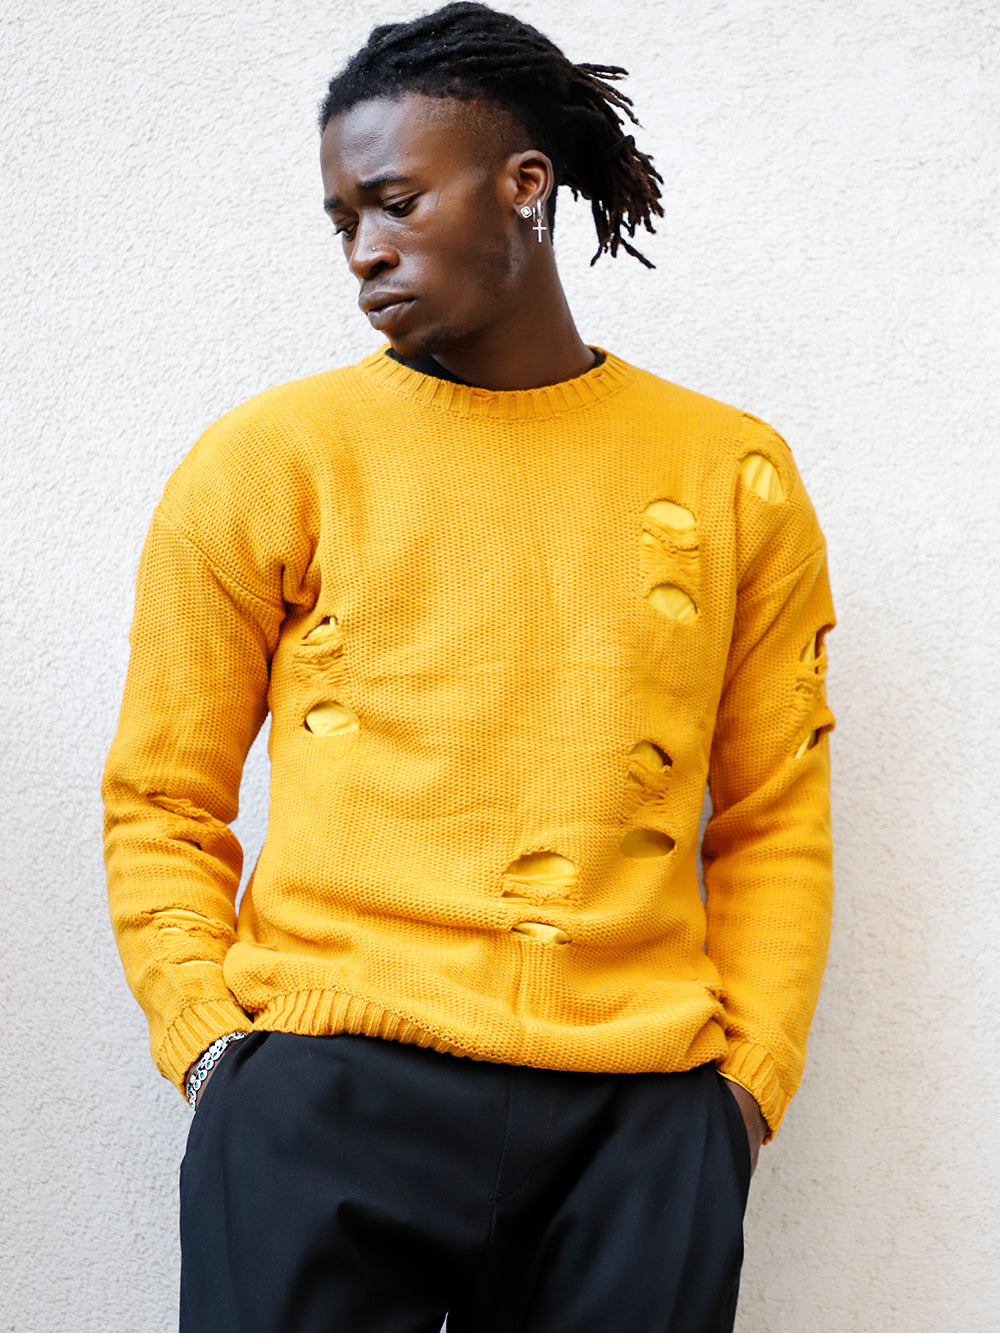 A man in a yellow sweater leaning against a wall, wearing a DISTRESSED DOUBLE LAYER SWEATER // MUSTARD.